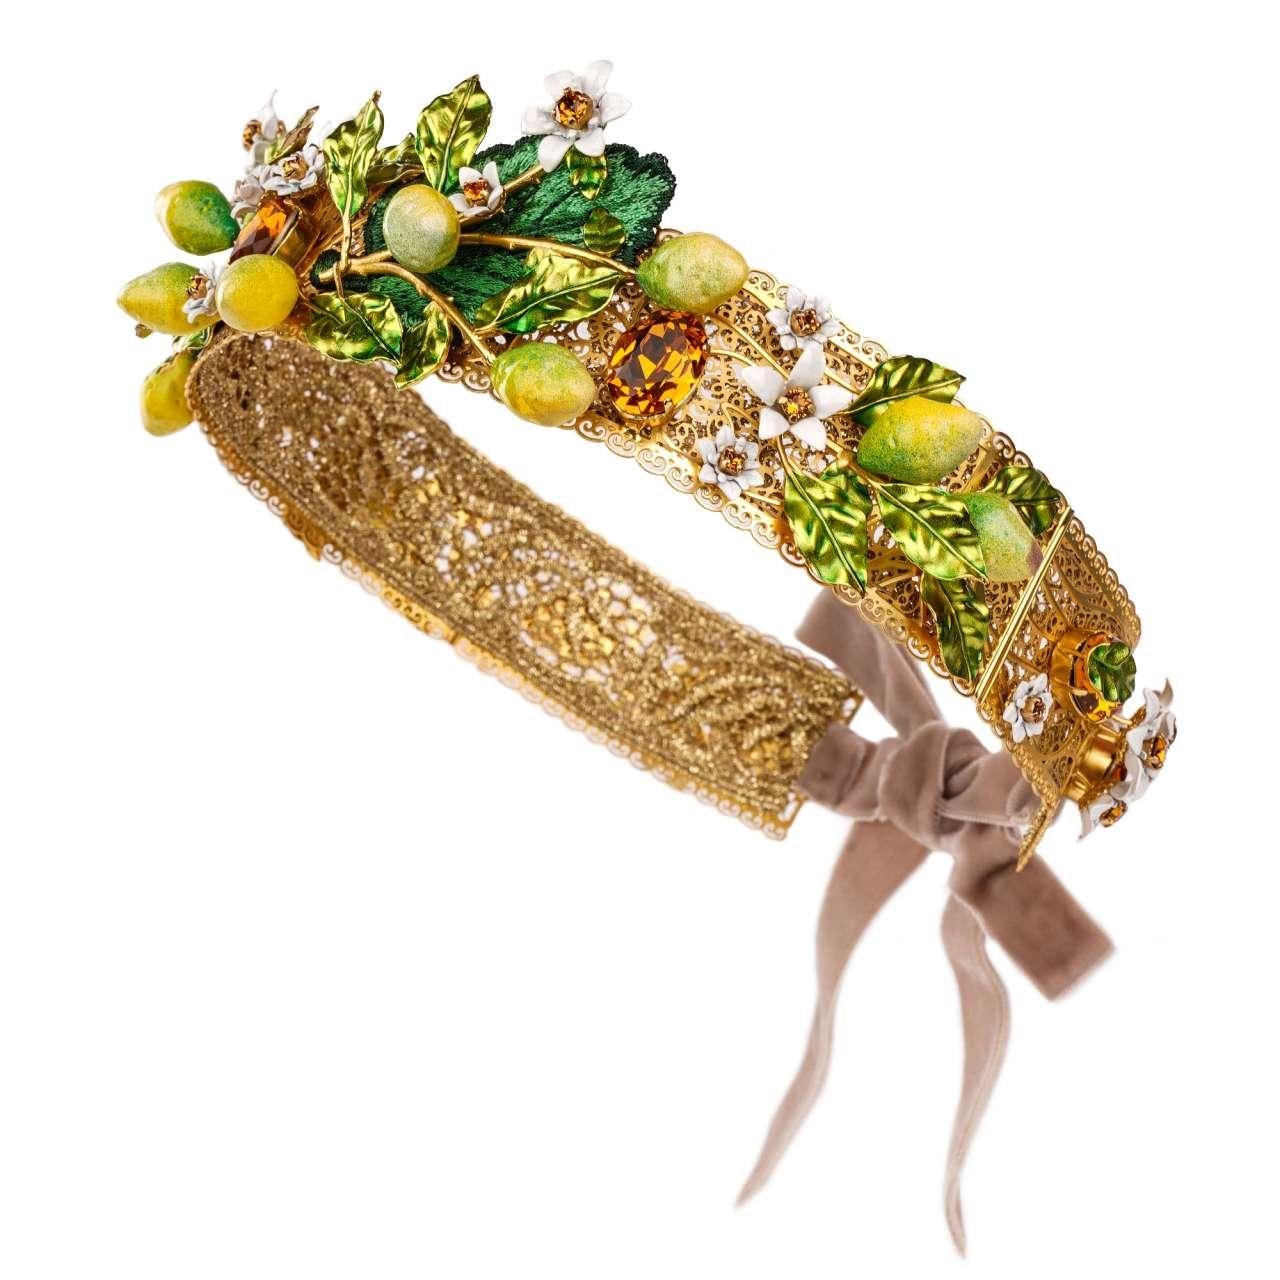 - Filigree Tiara Crown with lemons, flowers, crystals and embroidered leaves in yellow, green and gold by DOLCE & GABBANA - Former RRP: EUR 1.450 - RUNWAY - Dolce & Gabbana Fashion Show - New with Tag - MADE IN ITALY - Colorful crystals - Nickel